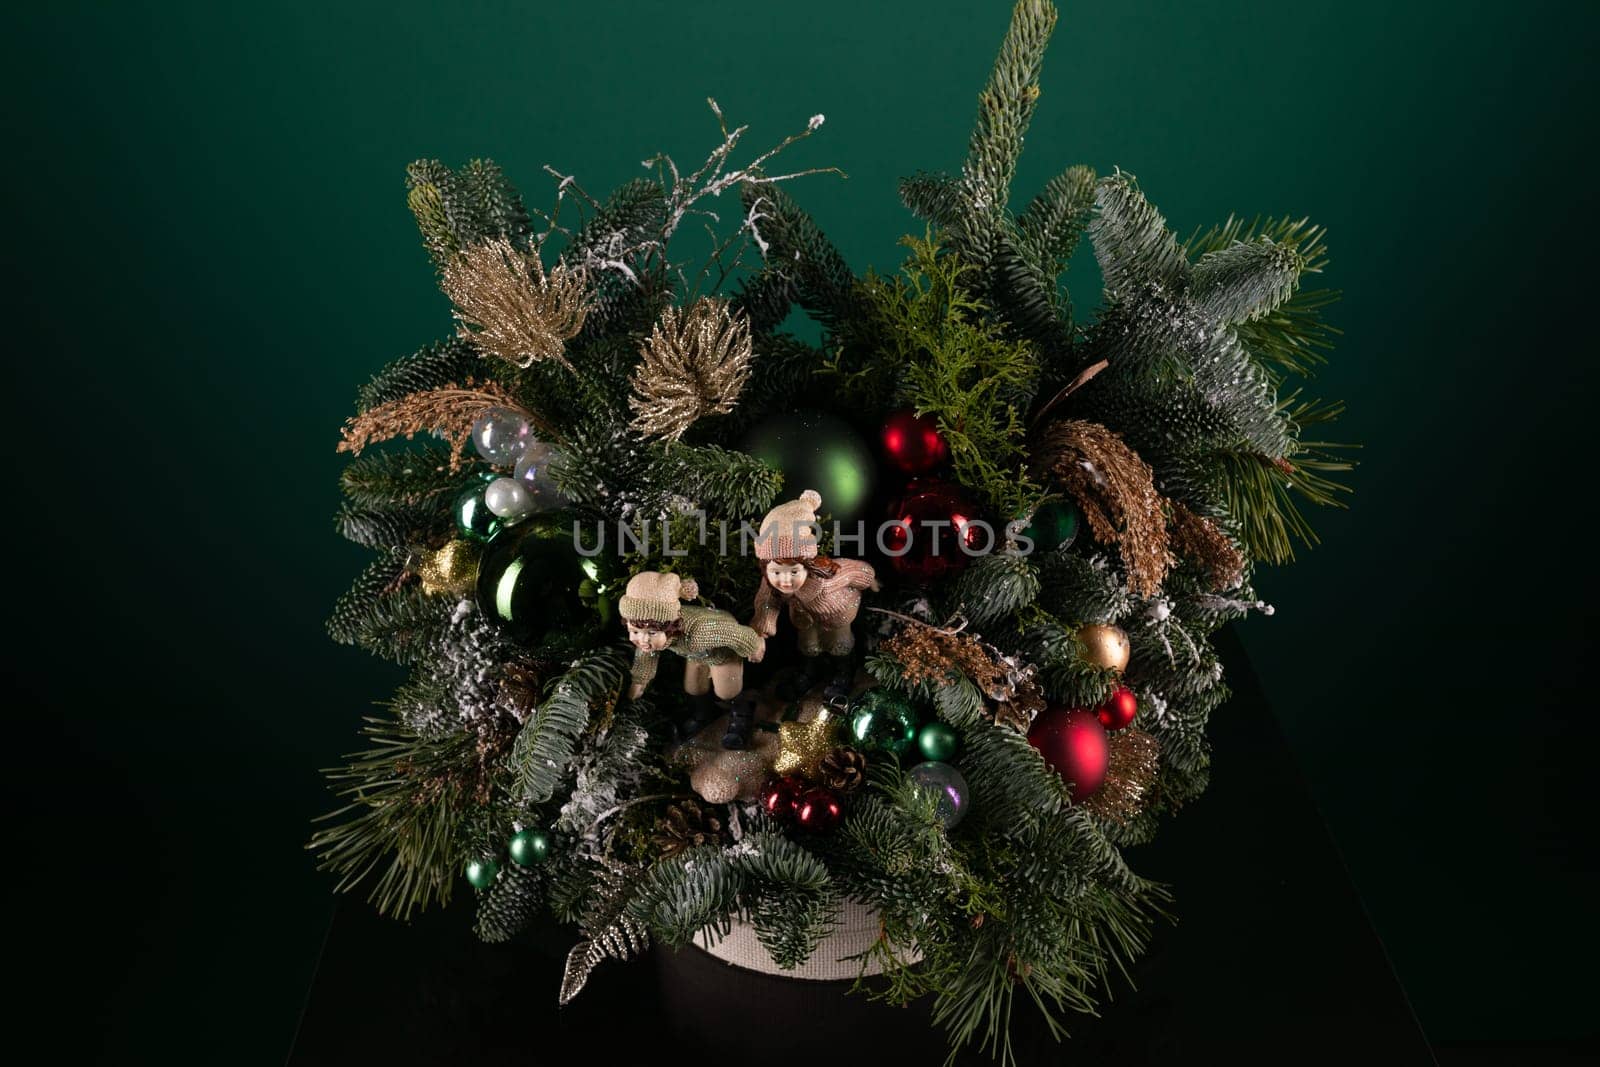 A potted plant is decorated with festive Christmas ornaments and lights, adding a touch of holiday cheer to the indoor space. The decorations include colorful baubles, twinkling lights, and a sparkling star on top.